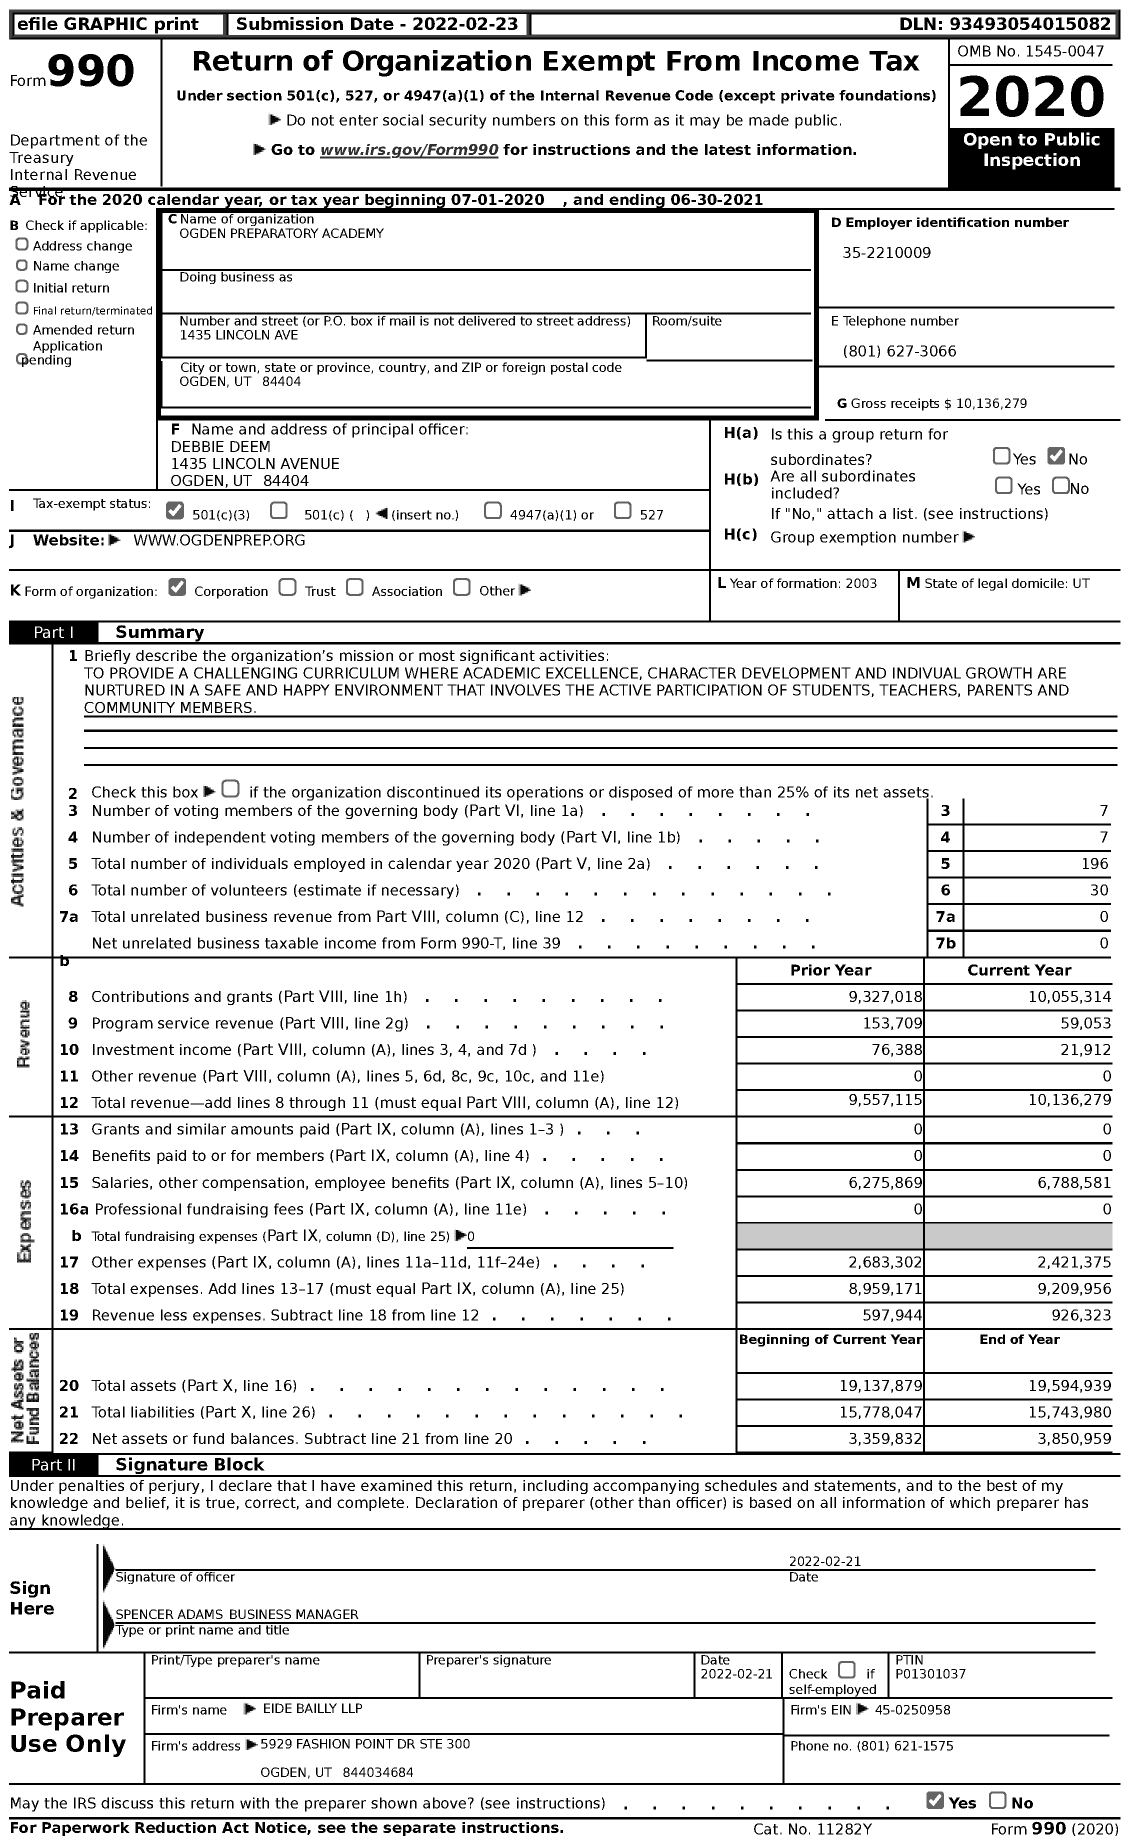 Image of first page of 2020 Form 990 for Ogden Preparatory Academy (OPA)